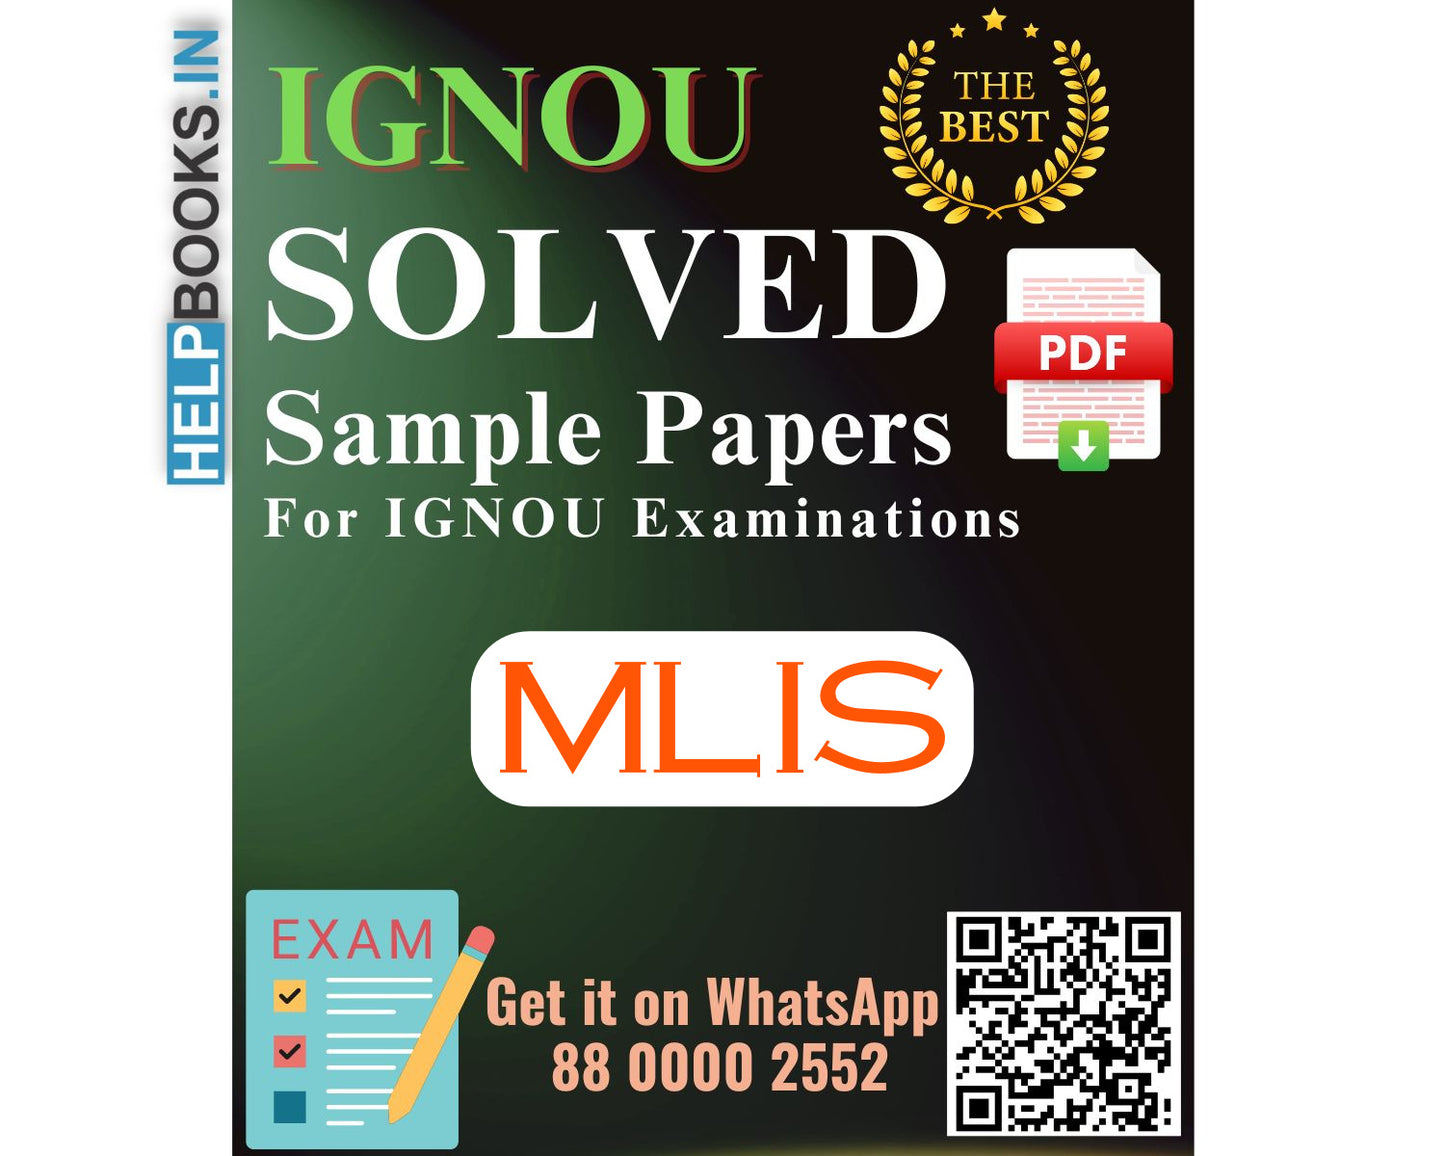 IGNOU Master of Library and Information Sciences (MLIS) | Solved Sample Papers for Exams